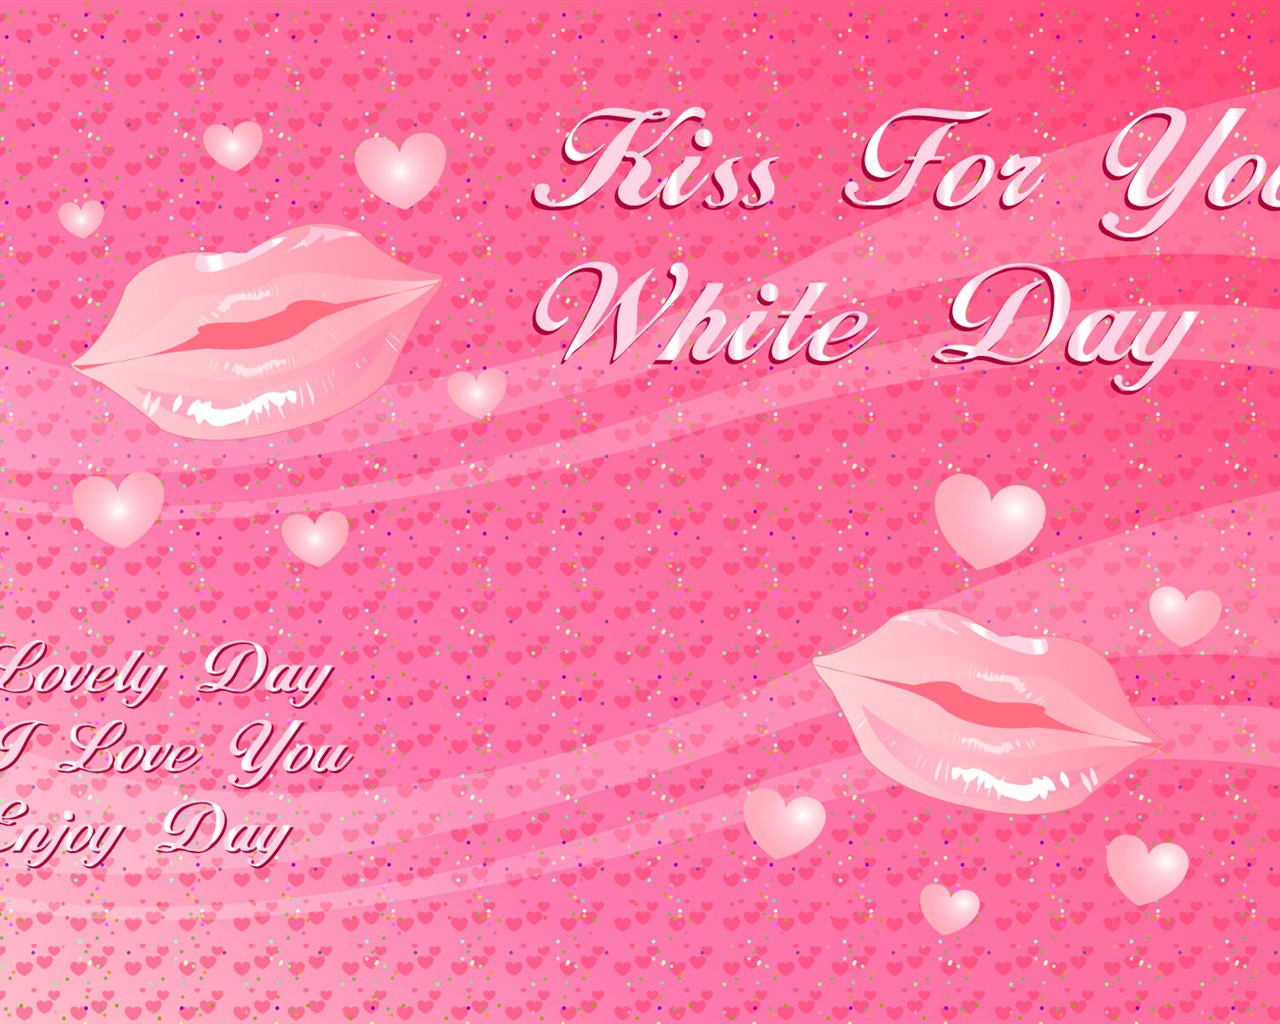 Valentine's Day Theme Wallpapers (1) #5 - 1280x1024